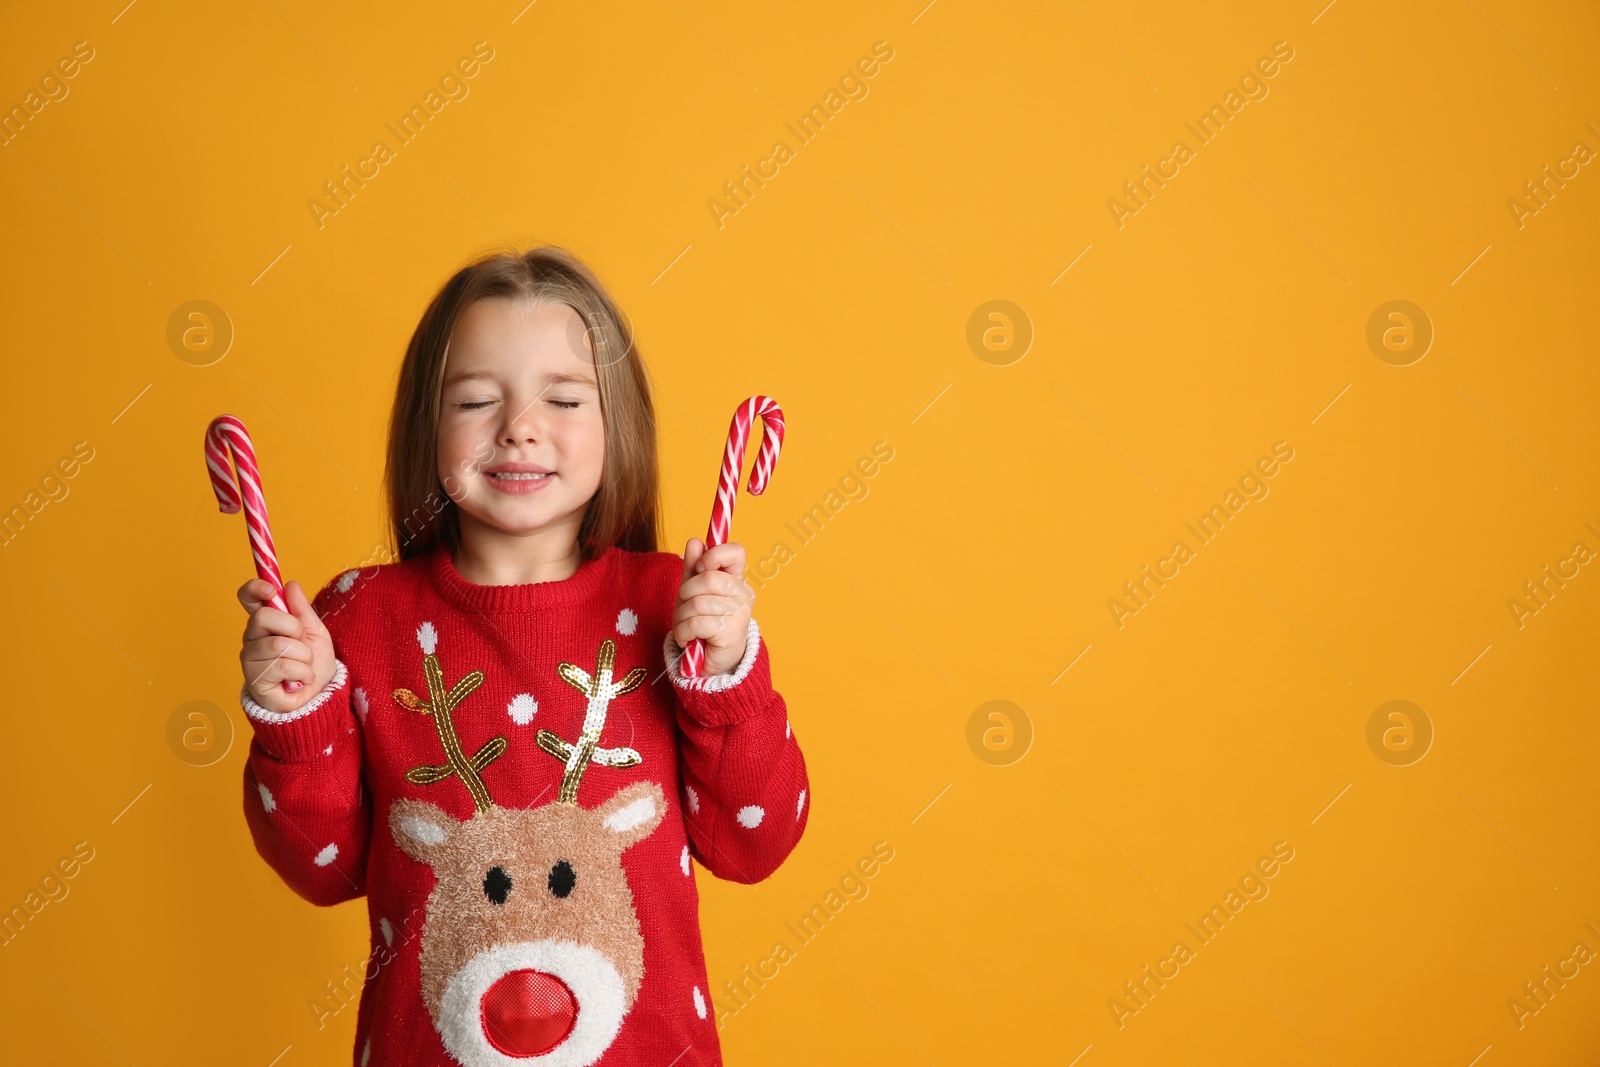 Photo of Cute little girl in Christmas sweater holding candy canes on yellow background, space for text